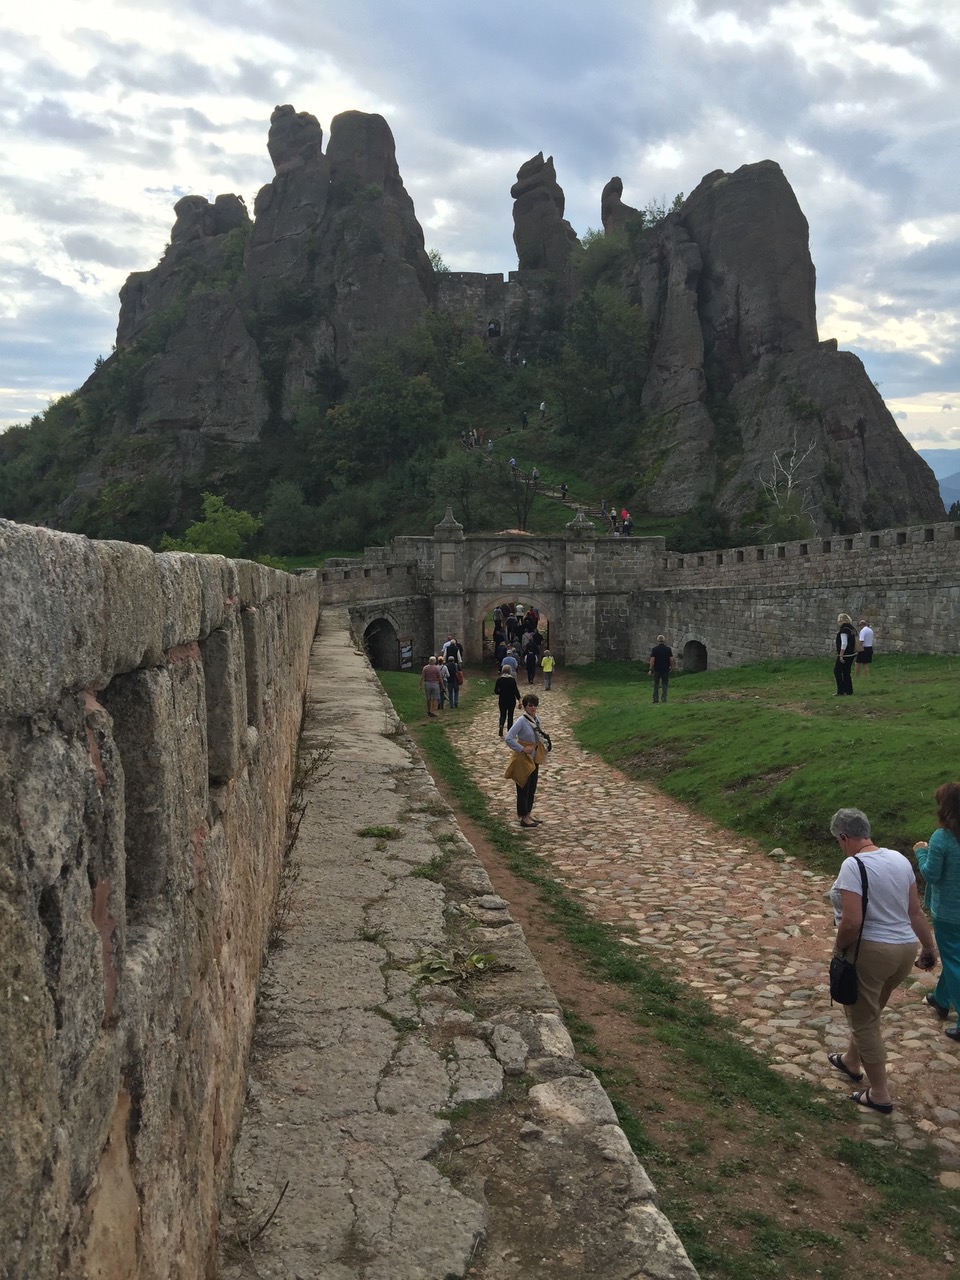 The expanse of wall leading to the gate and the Belogradchik rocks beyond